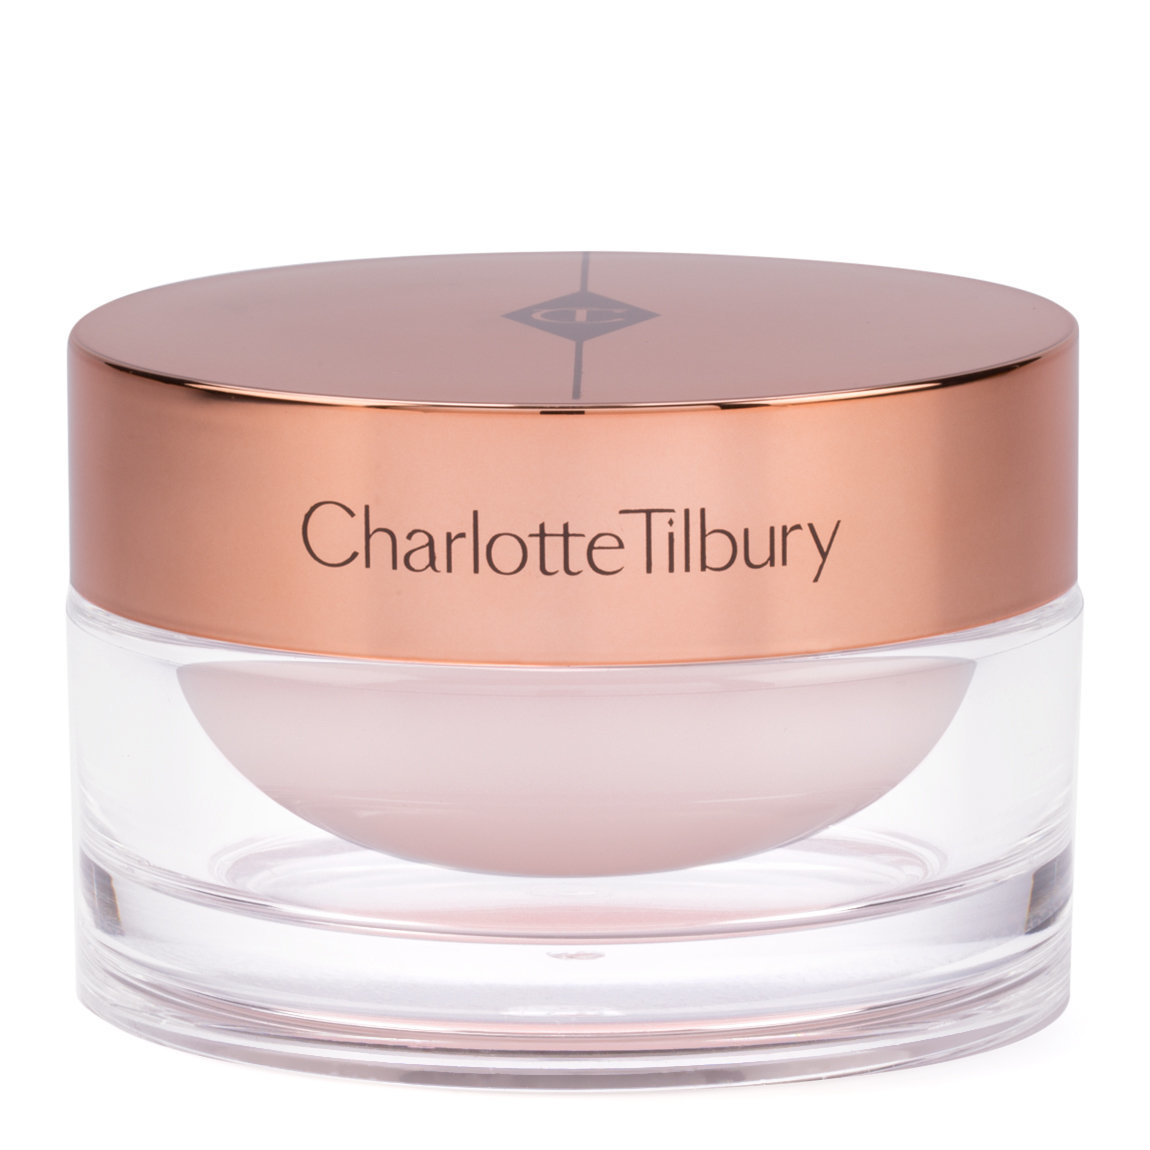 Charlotte Tilbury Multi-Miracle Glow 100 ml alternative view 1 - product swatch.